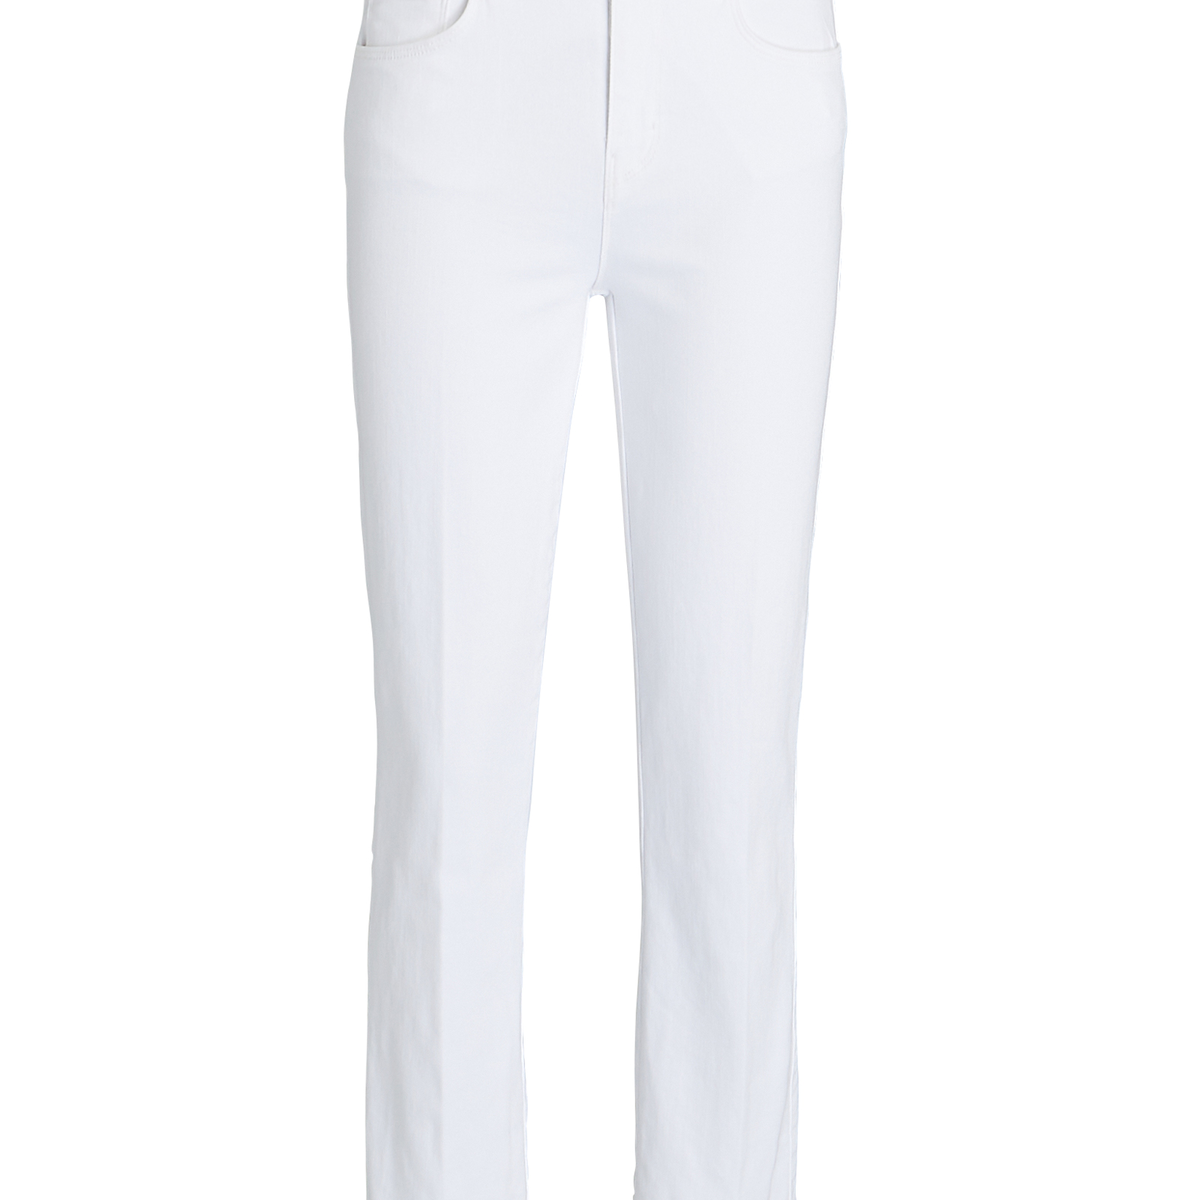 L'Agence Alexia High-Rise Jeans in White | INTERMIX®